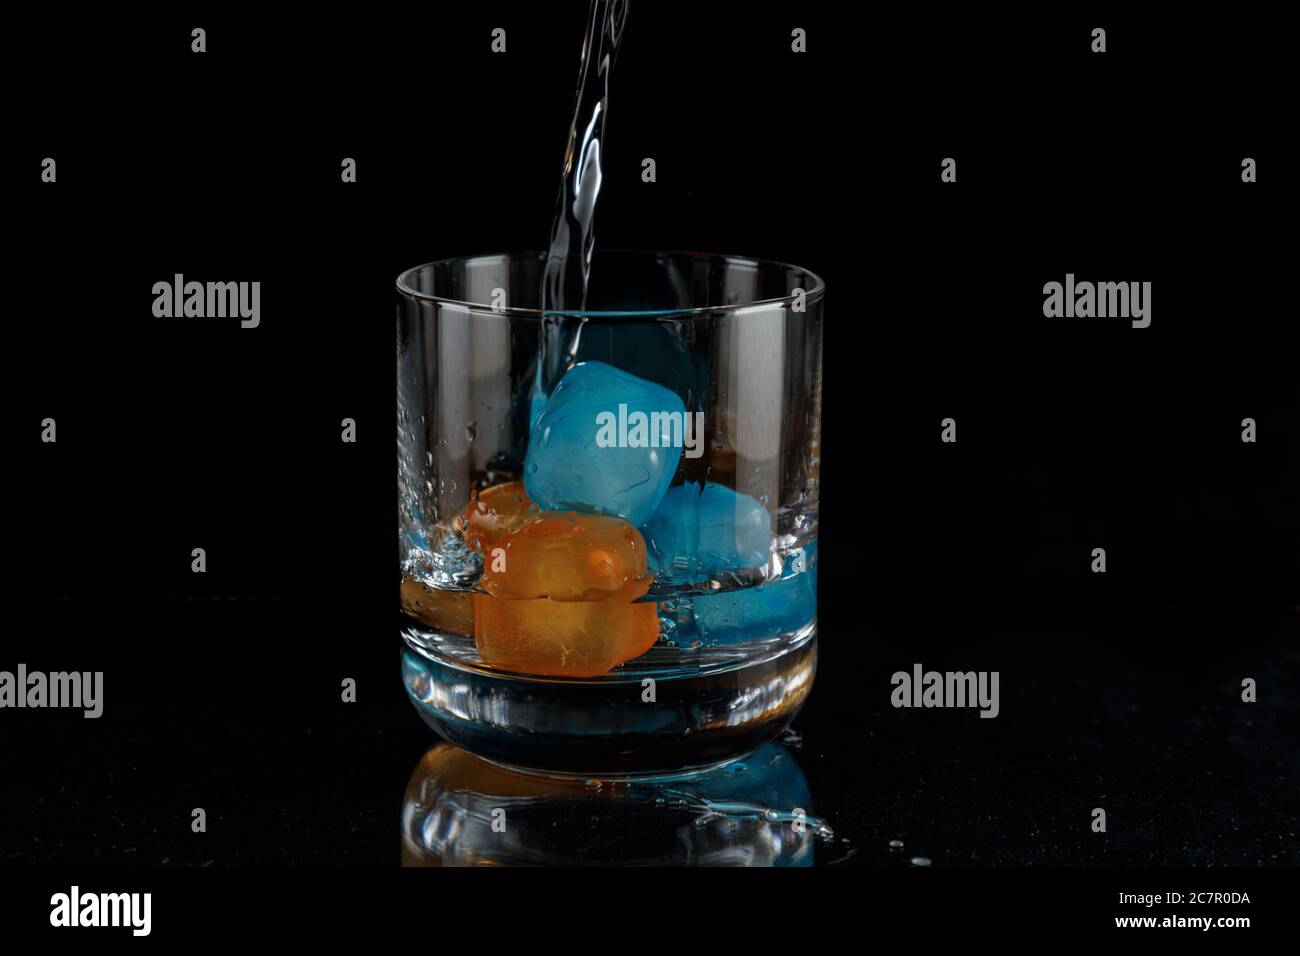 Preparing a drink while pouring over the ice cubes against a black background Stock Photo